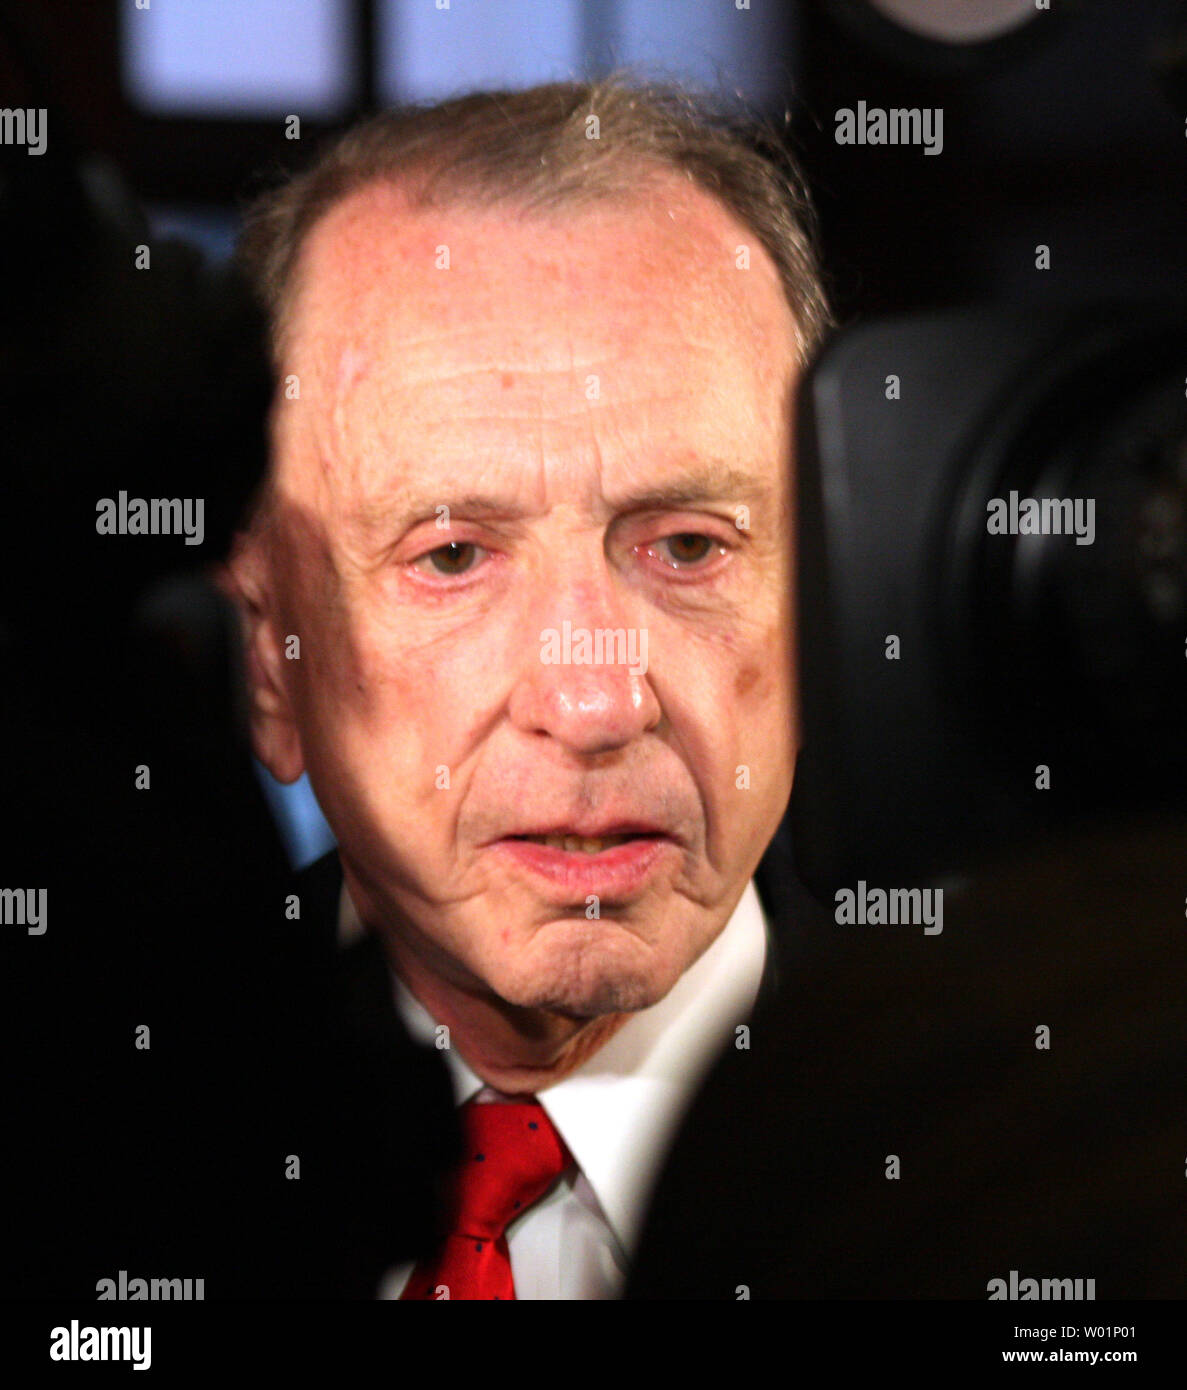 Sen. Arlen Specter (D-PA) appears concerned as he speaks with news media during his day of campaigning in Philadelphia May 18, 2010. He was defeated by Democratic congressman Joe Sestak during the Pa. Primary late May 18, 2060.Specter had to battle his age and his recent defection from the Republican Party to the Democratic Party.         UPI /John Anderson Stock Photo